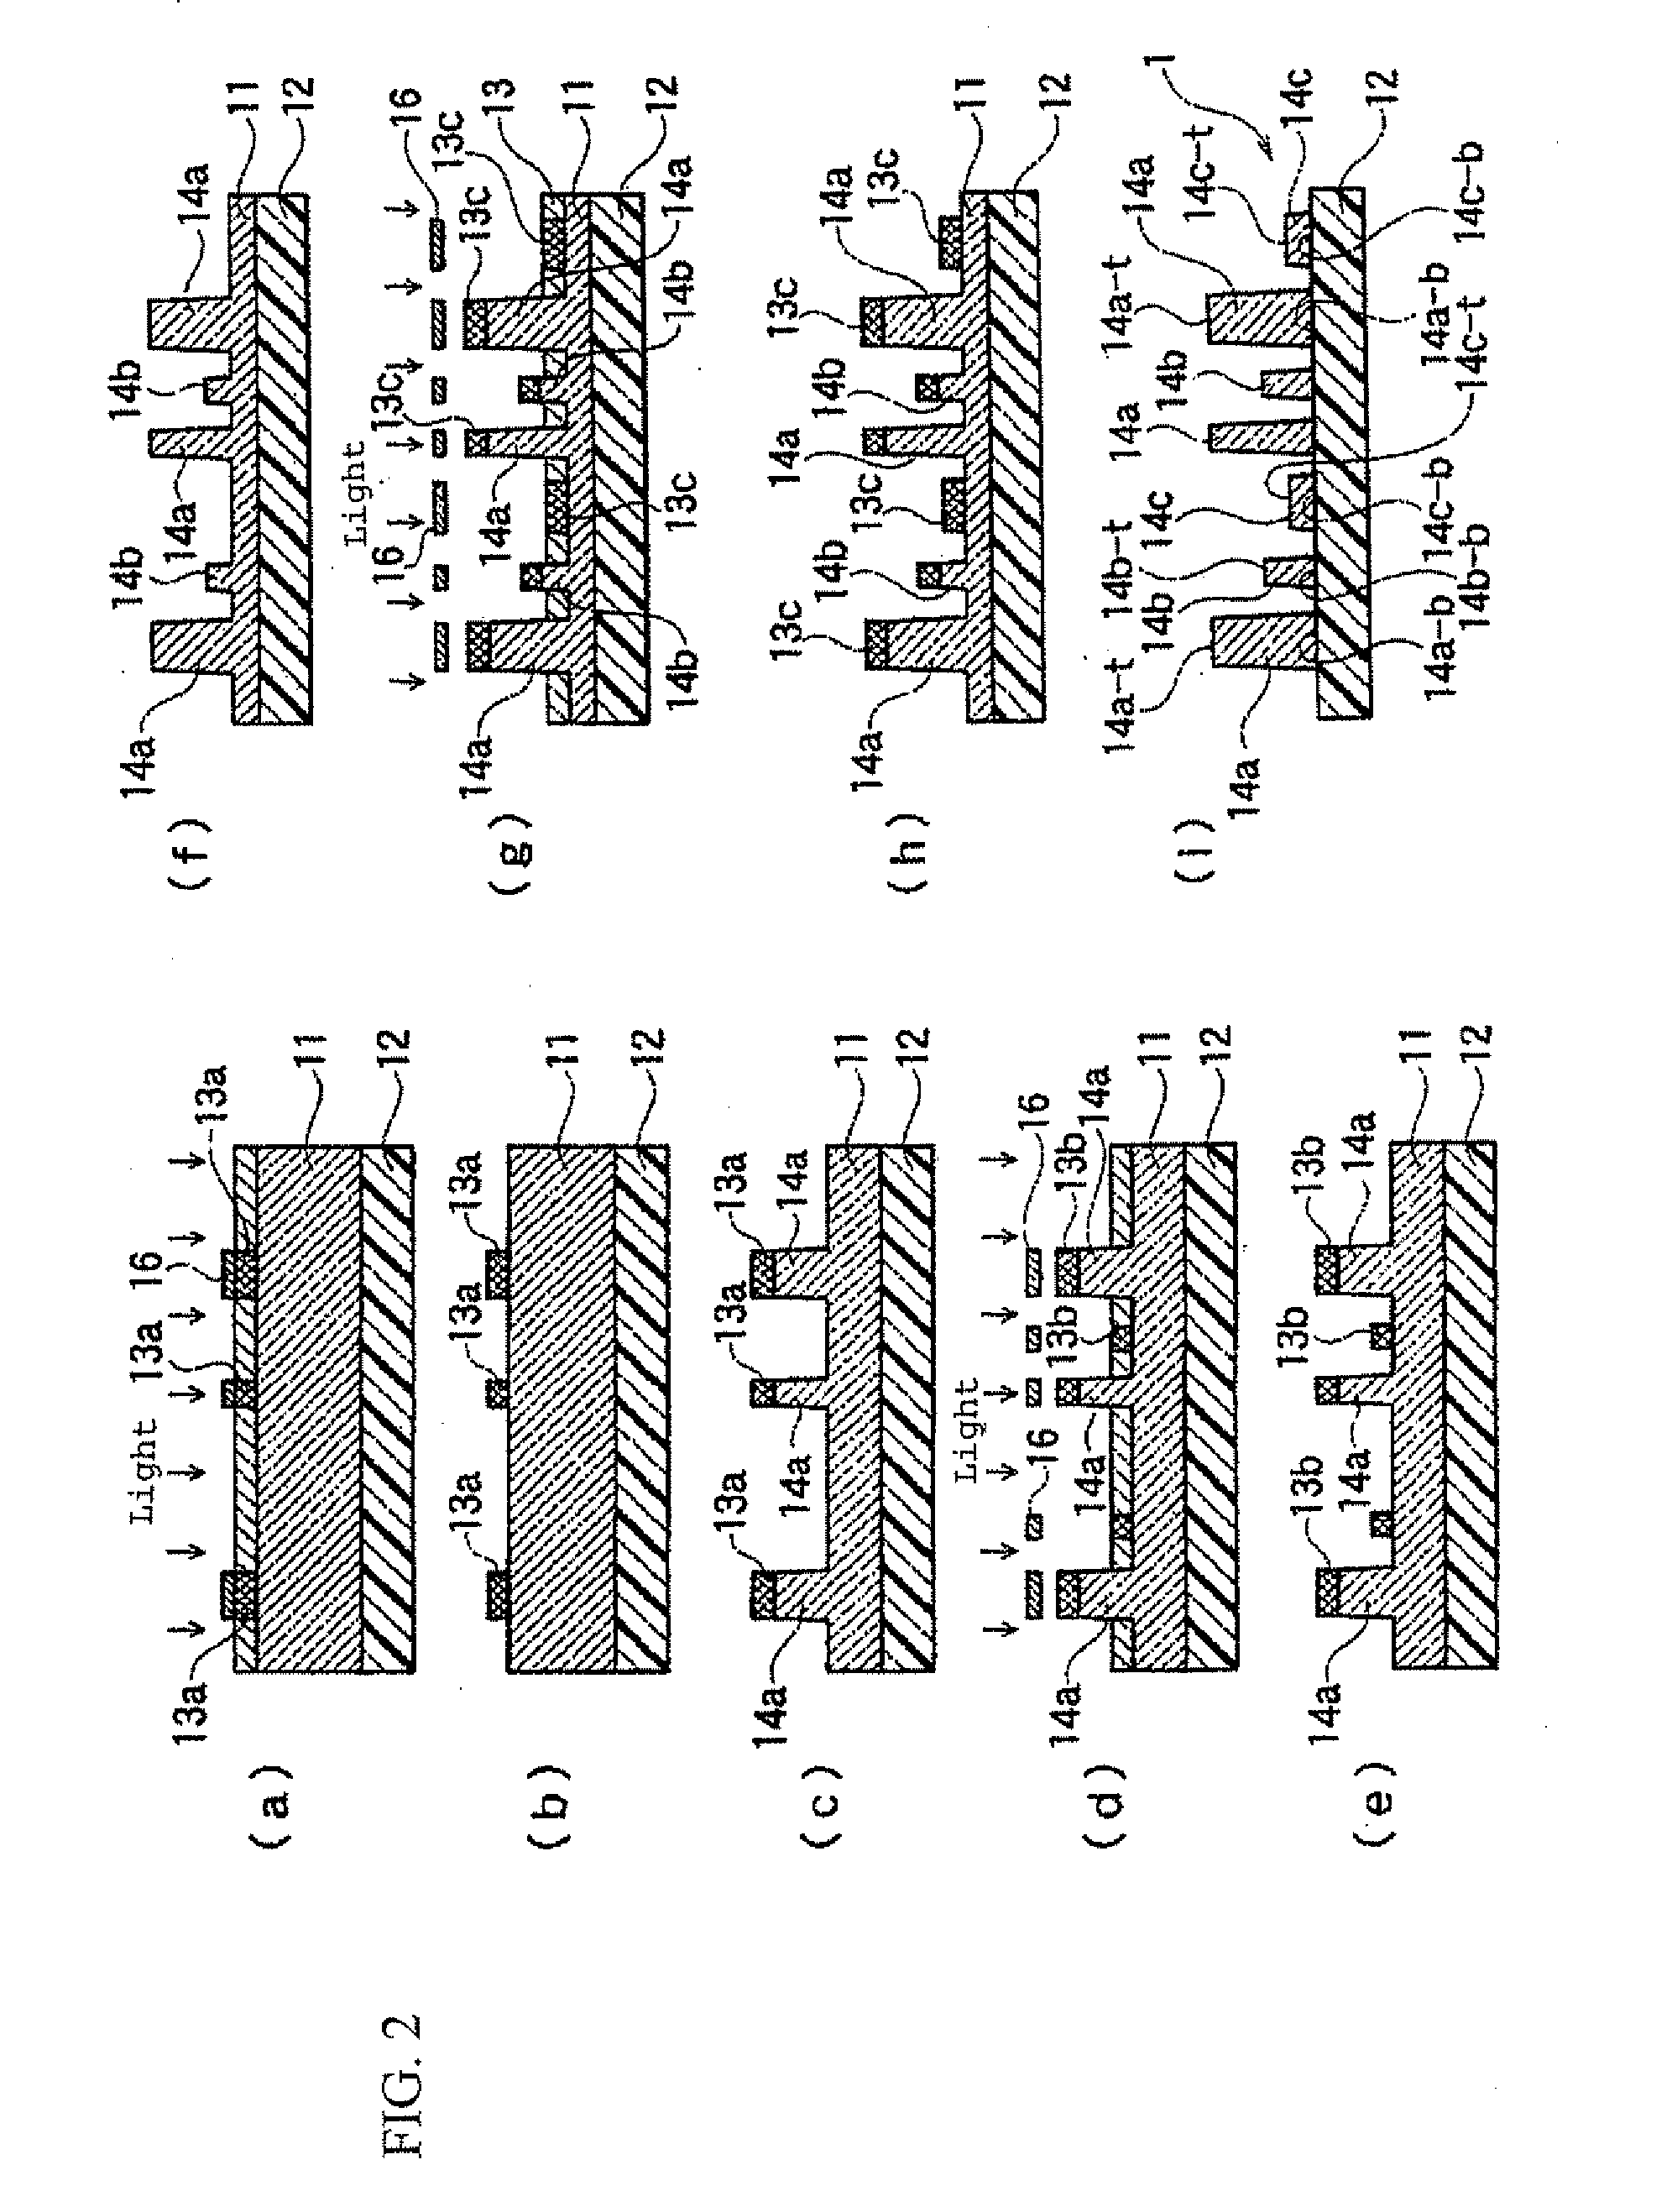 Mold for Wiring Substrate Formation and Process for Producing the Same, Wiring Substrate and Process for Producing the Same, Process for Producing Multilayered Laminated Wiring Substrate and Method for Viahole Formation